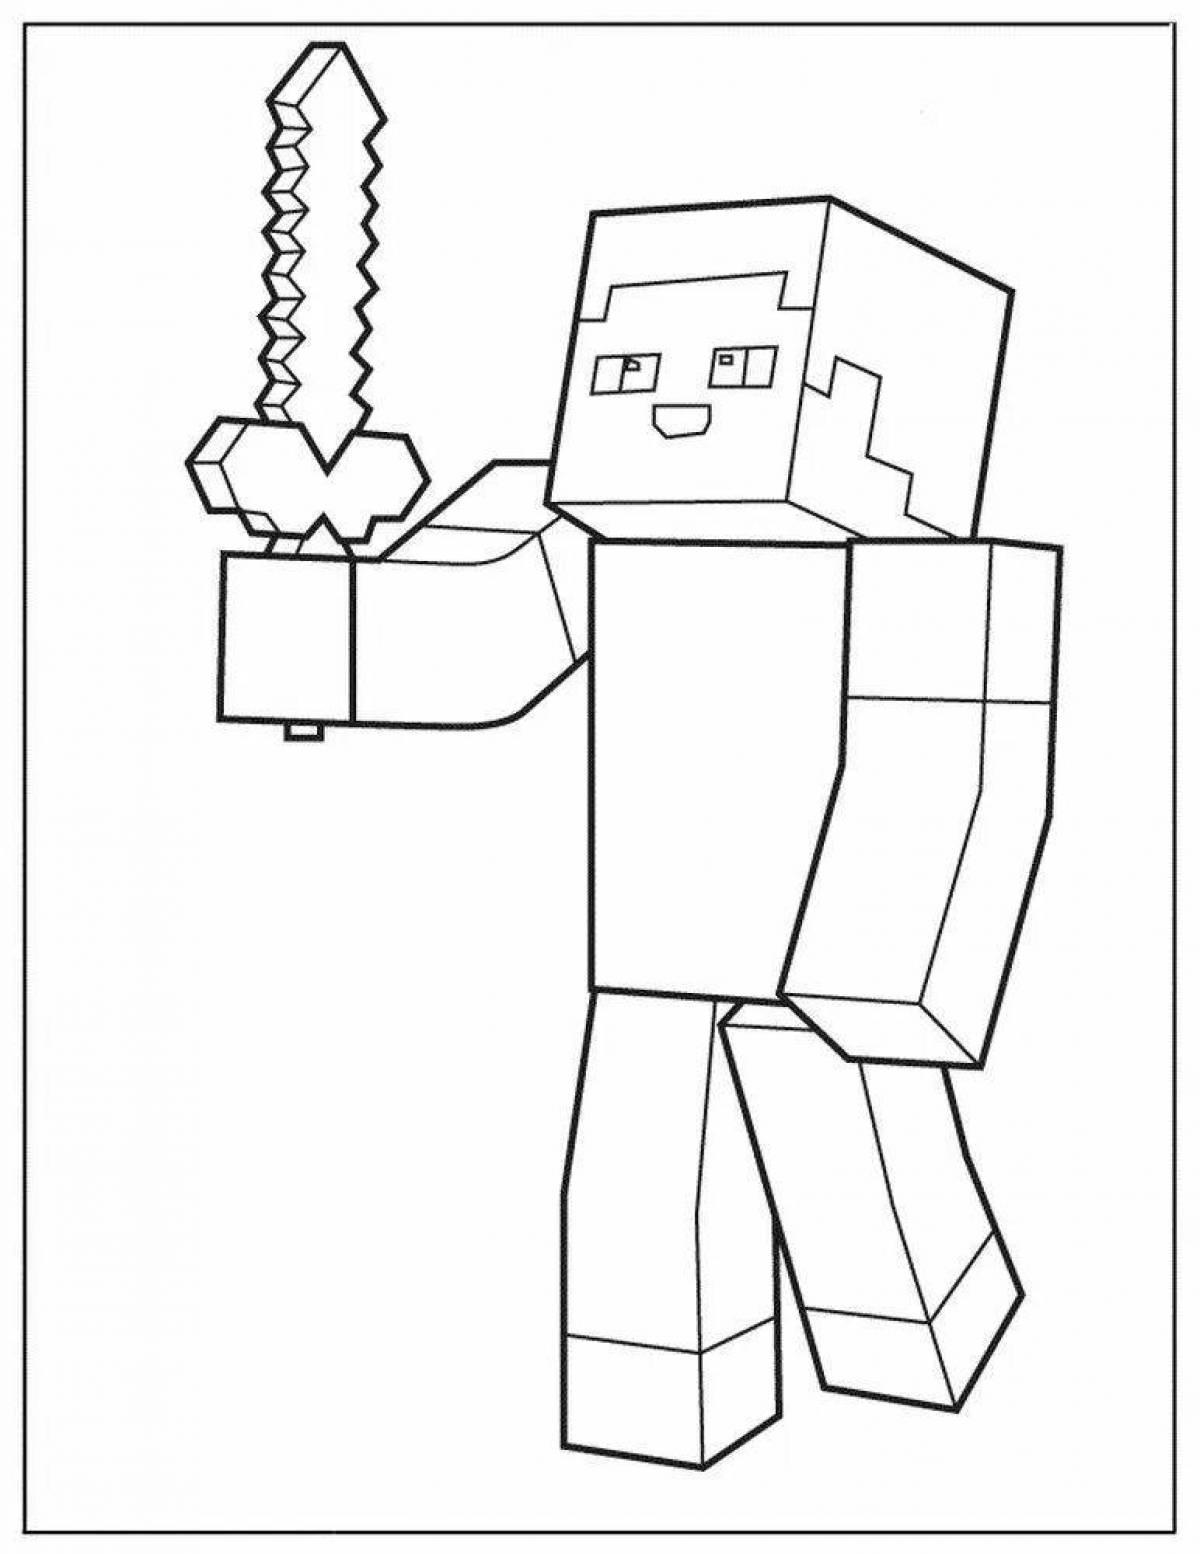 Exciting coloring minecraft men